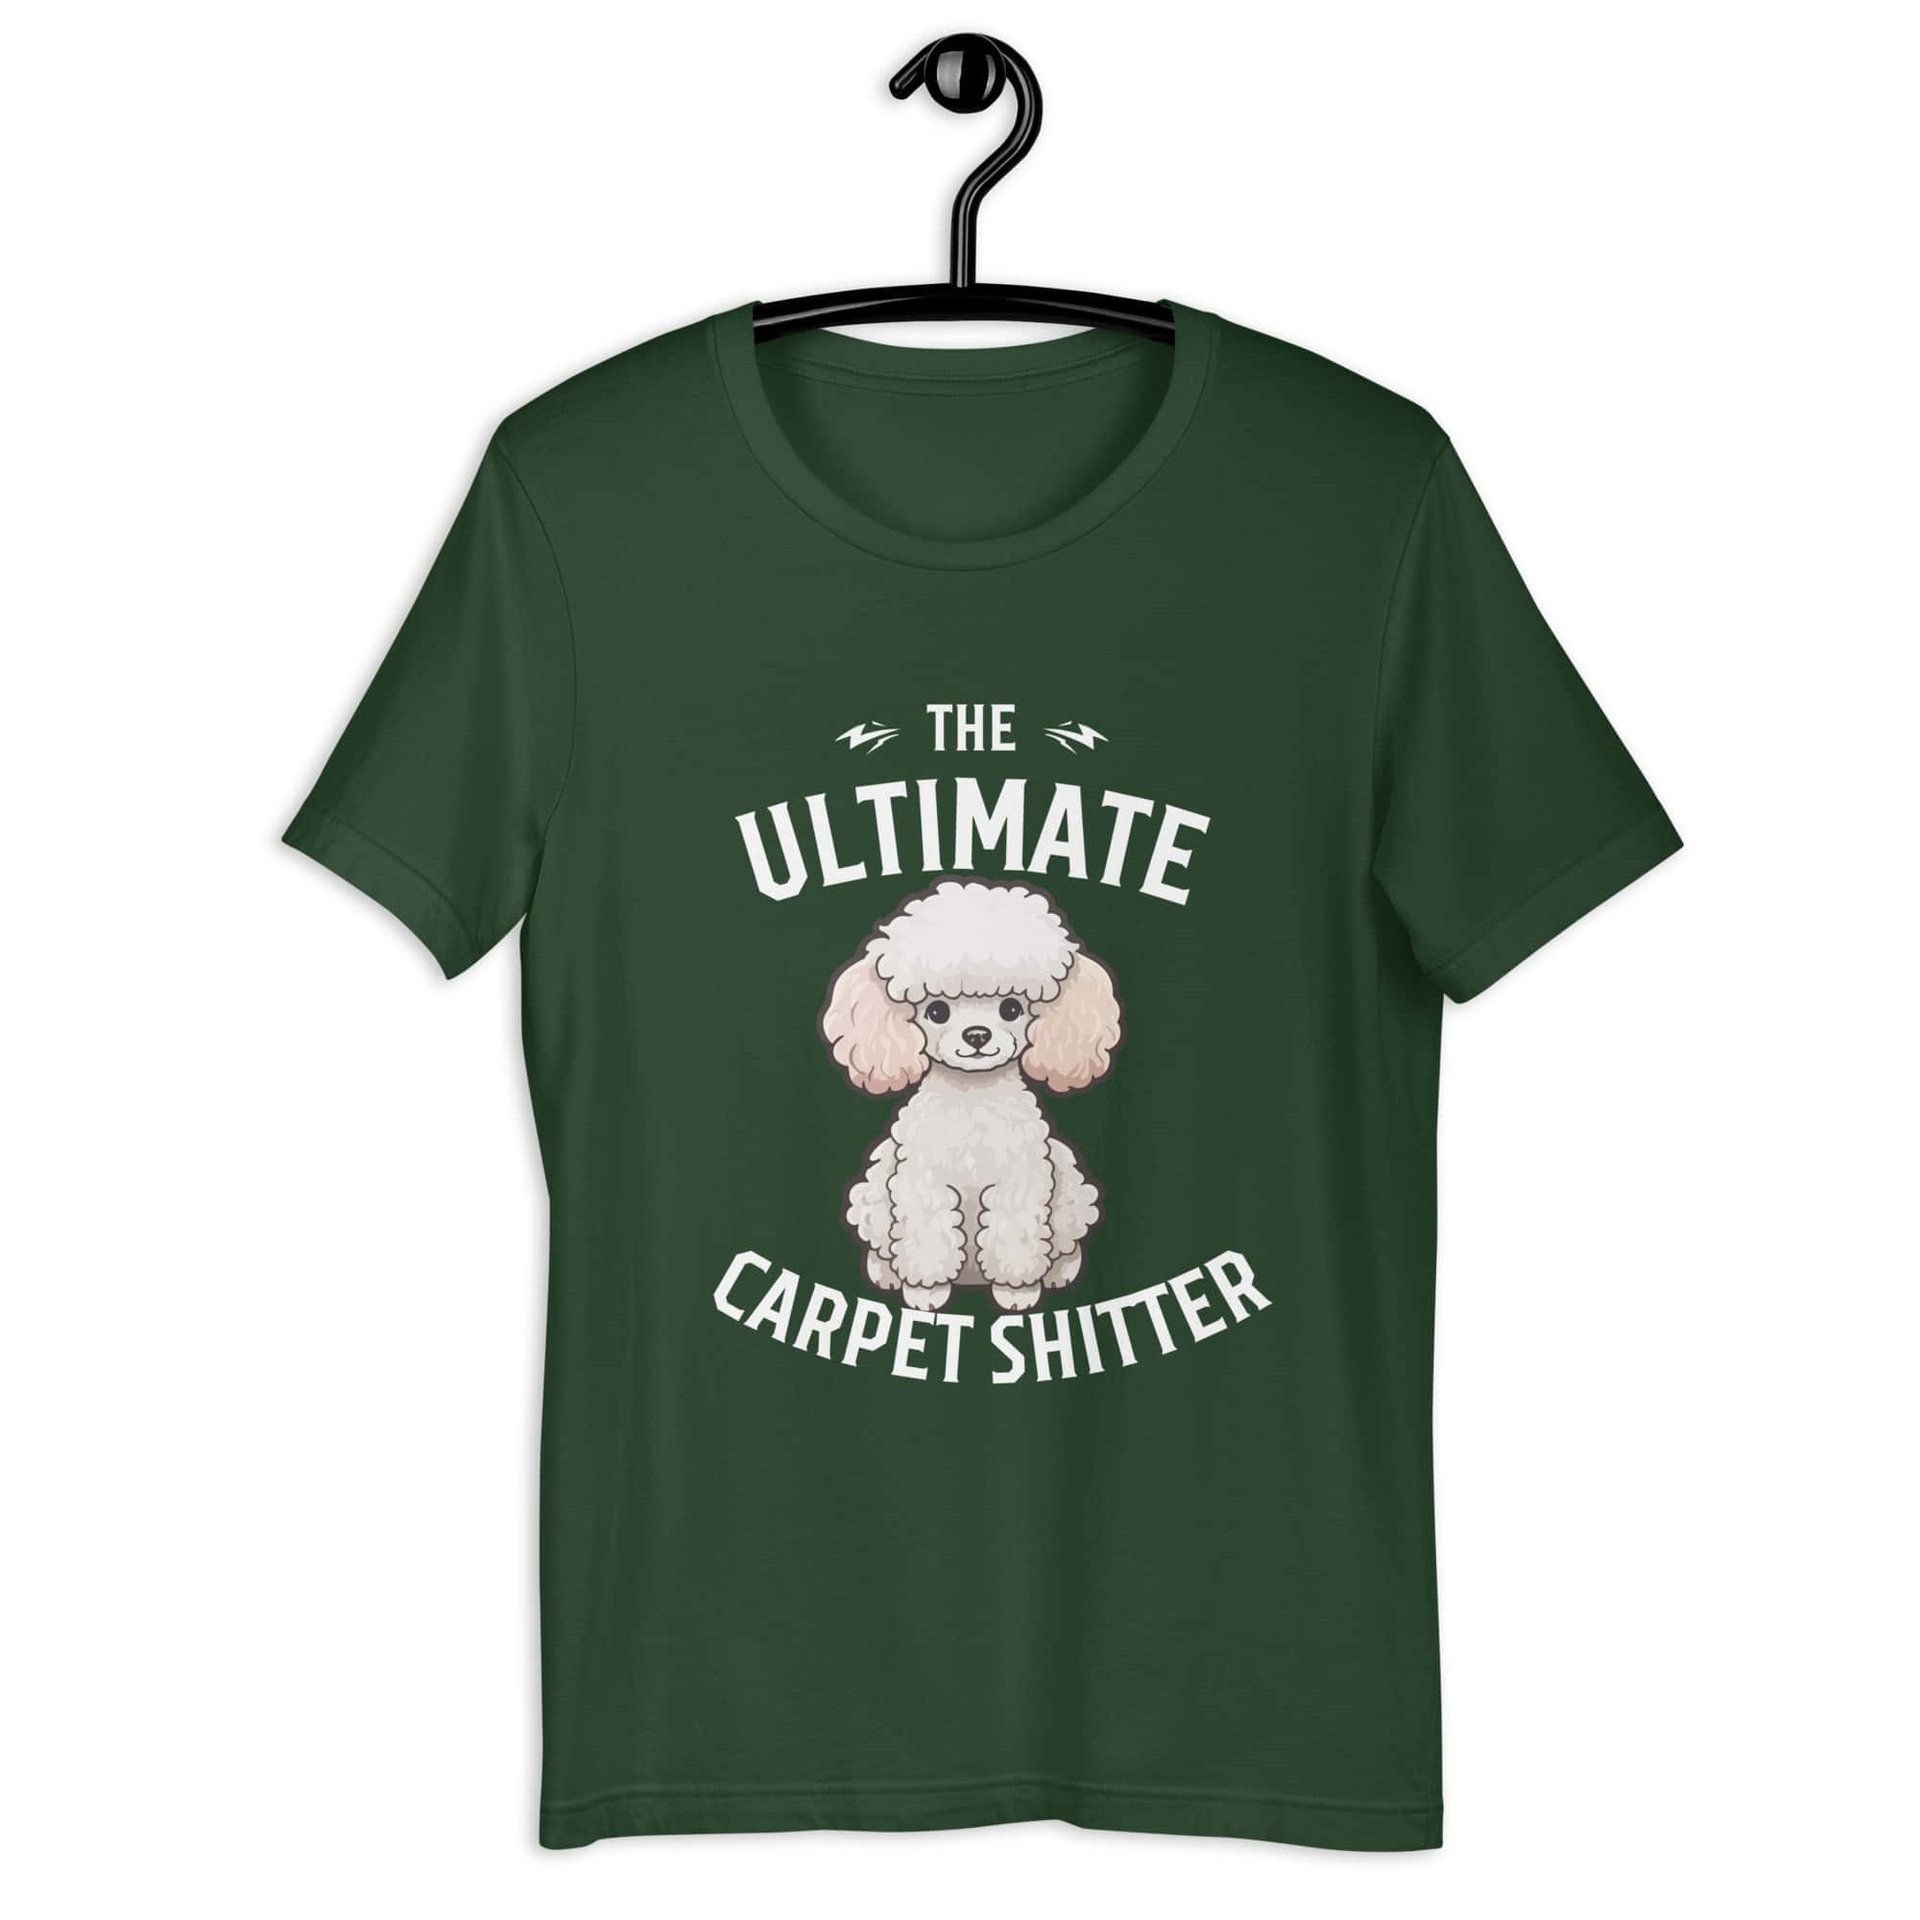 The Ultimate Carpet Shitter Funny Poodle Unisex T-Shirt green